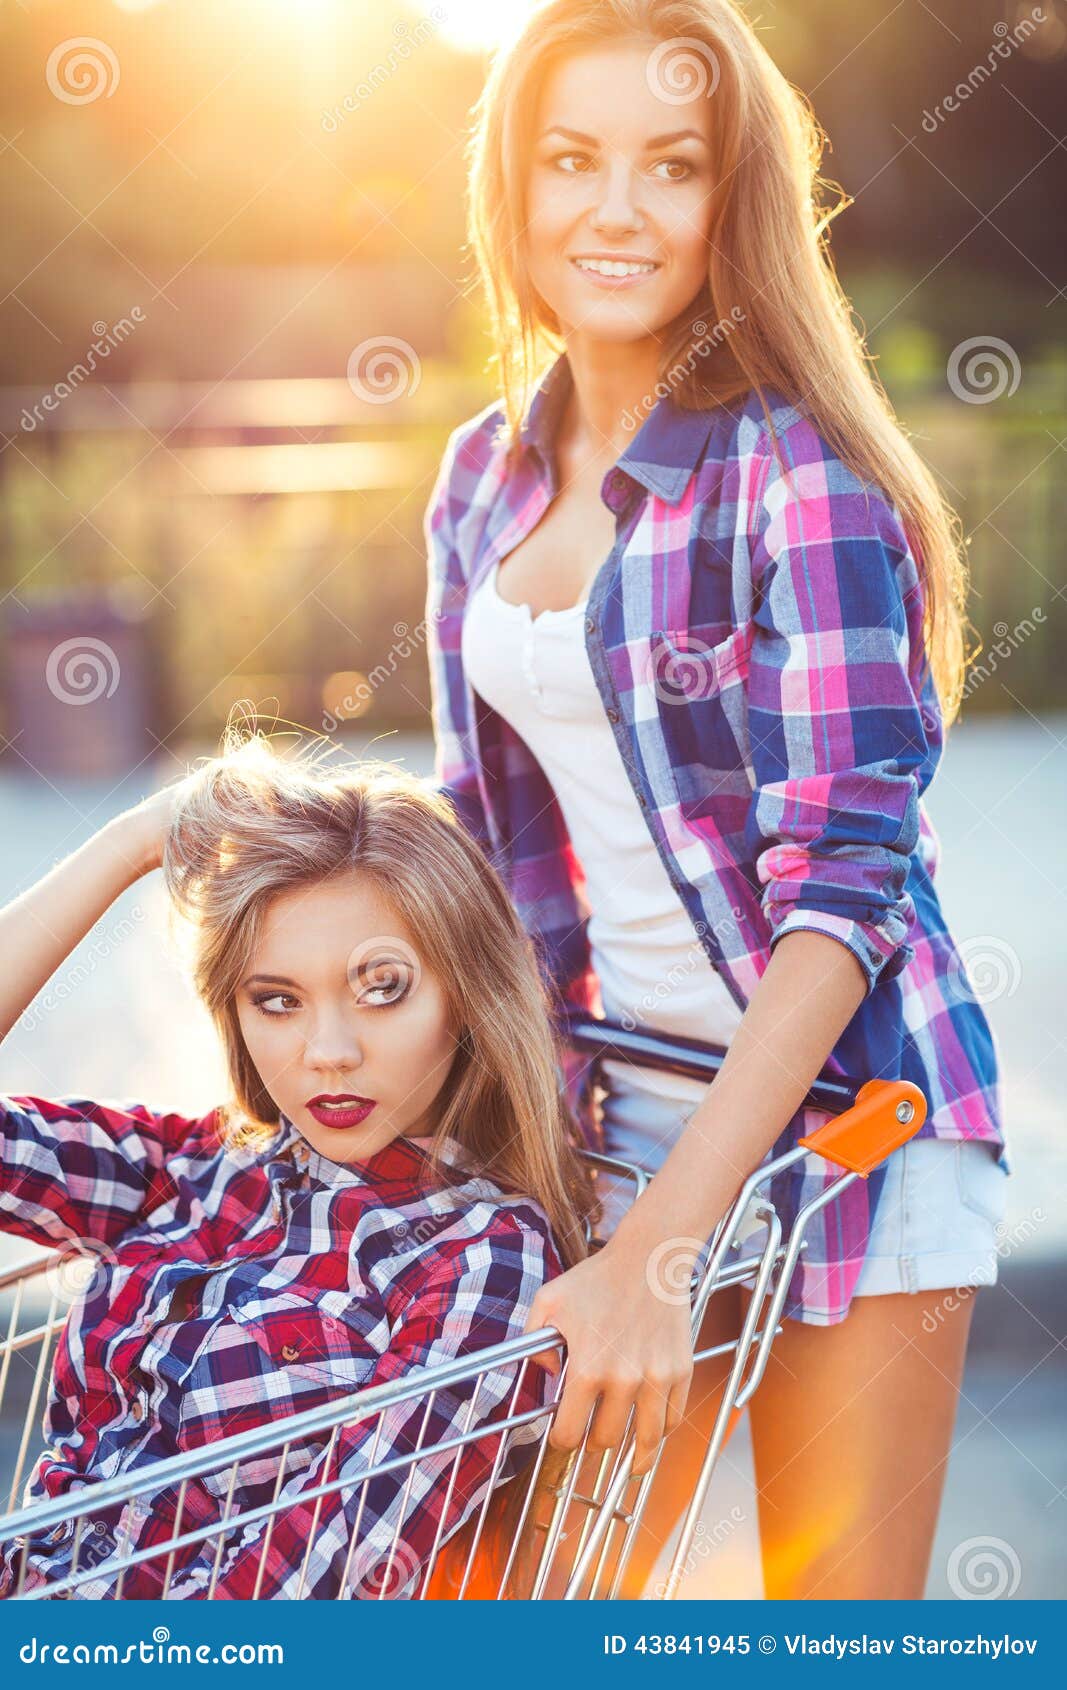 255,732 Teen Girl Fashion Stock Photos - Free & Royalty-Free Stock Photos  from Dreamstime